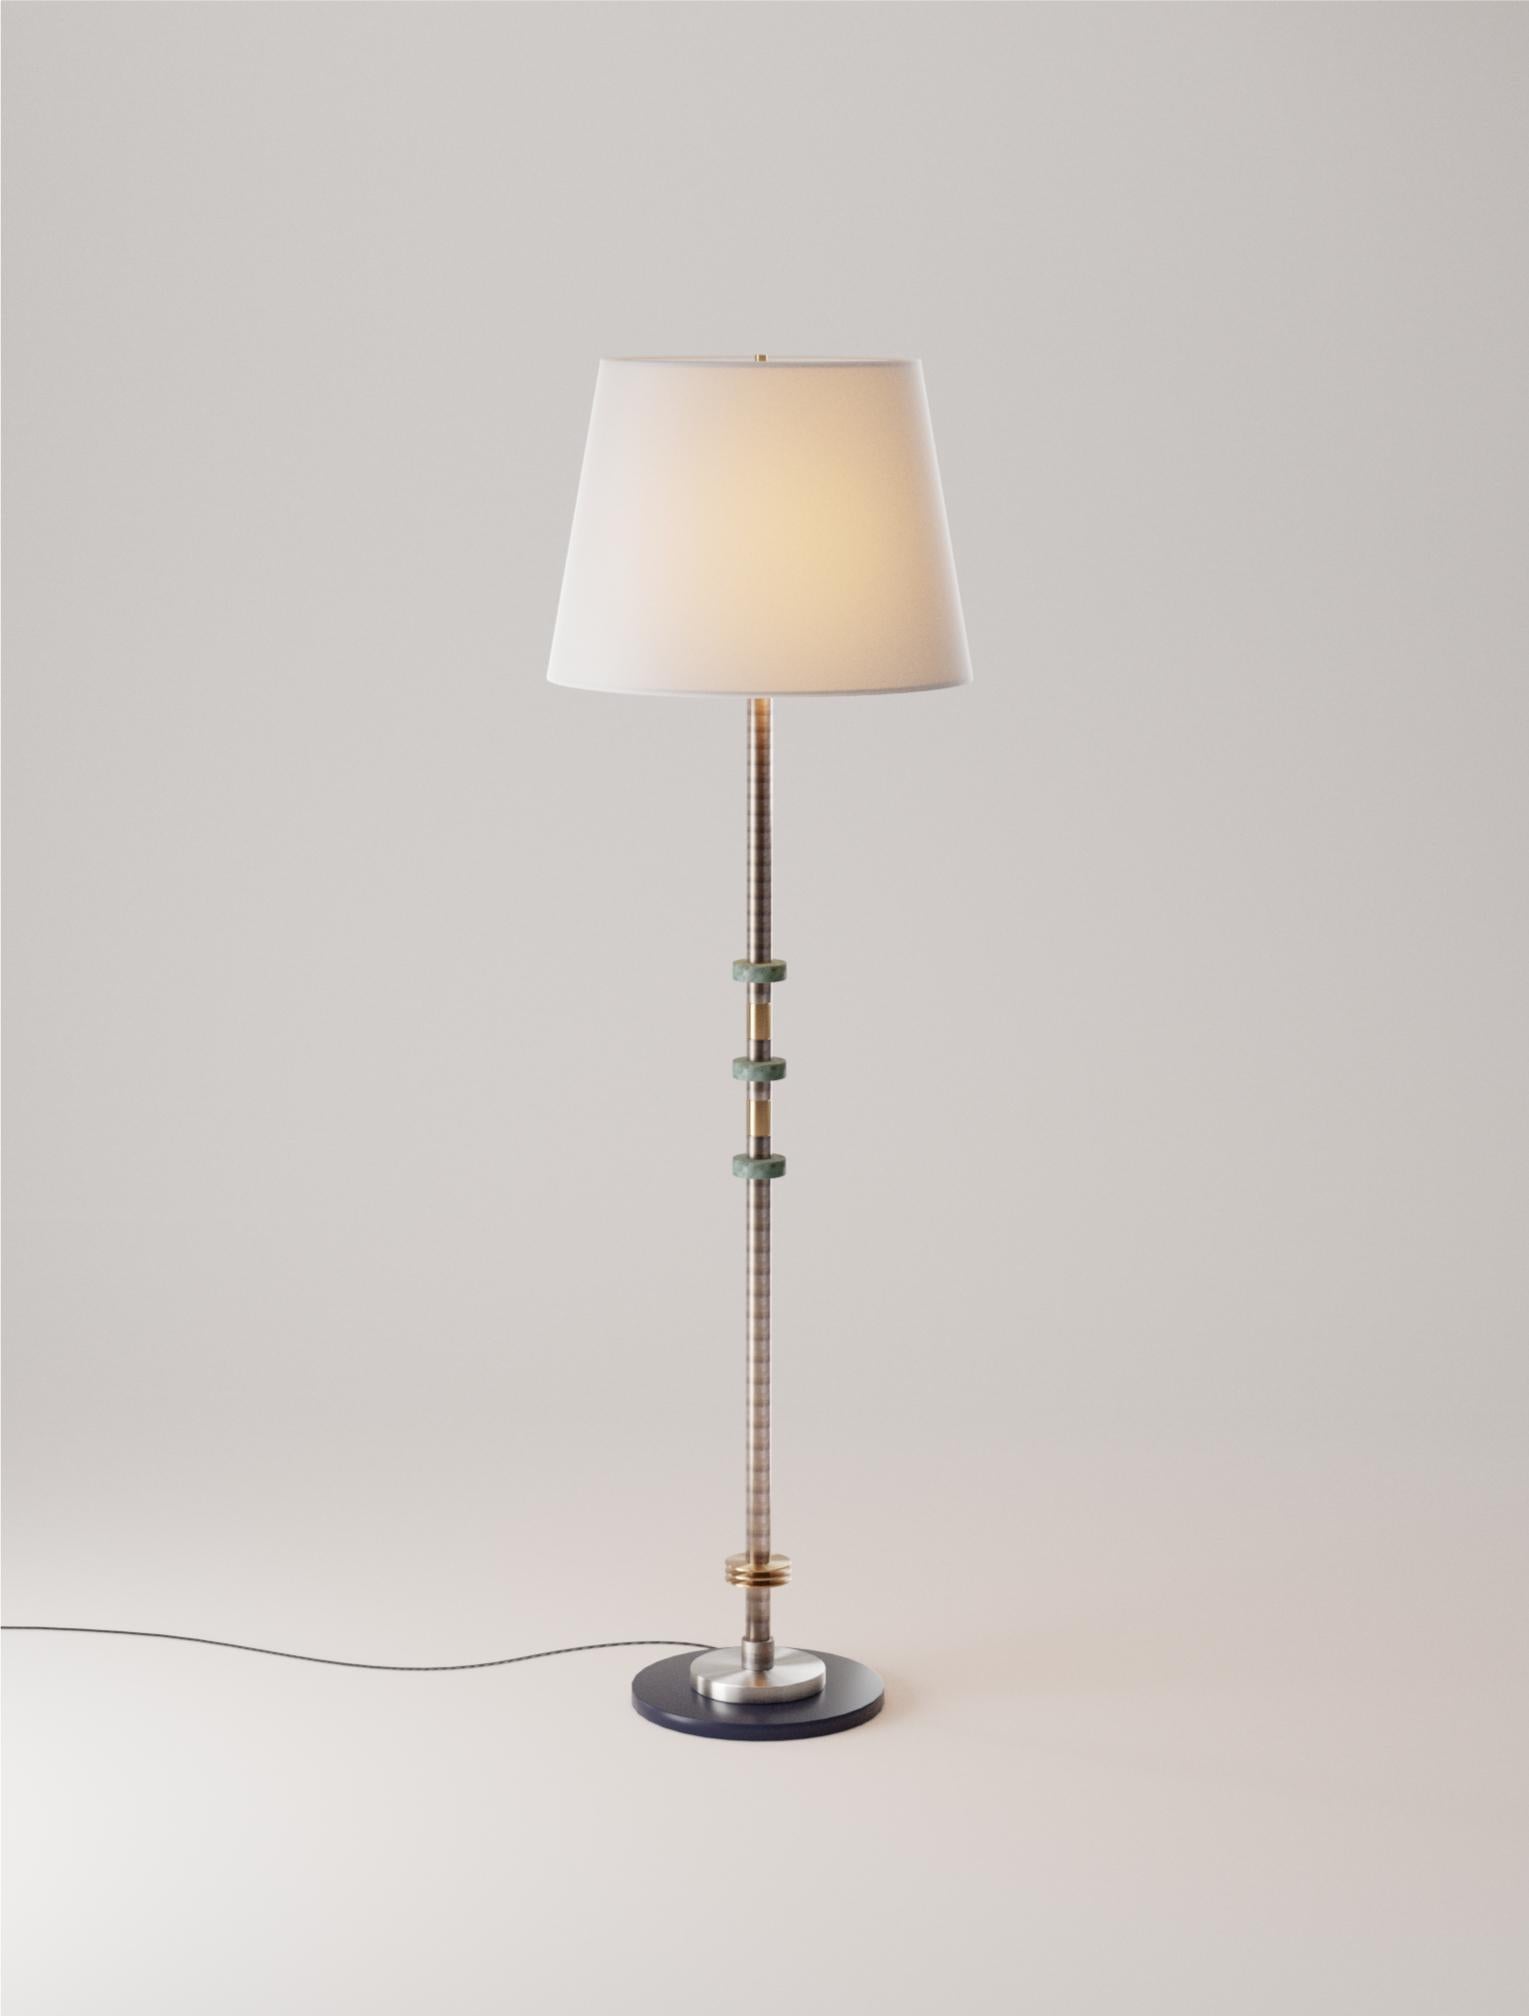 The Alte floor lamp is perfect for dressing up any room, offering both practical lighting and a touch of warmth, creating a welcoming atmosphere that invites relaxation and enjoyment.

Floor lamp - 2021

Composition :
Brass, Patinated Bronze, Paper